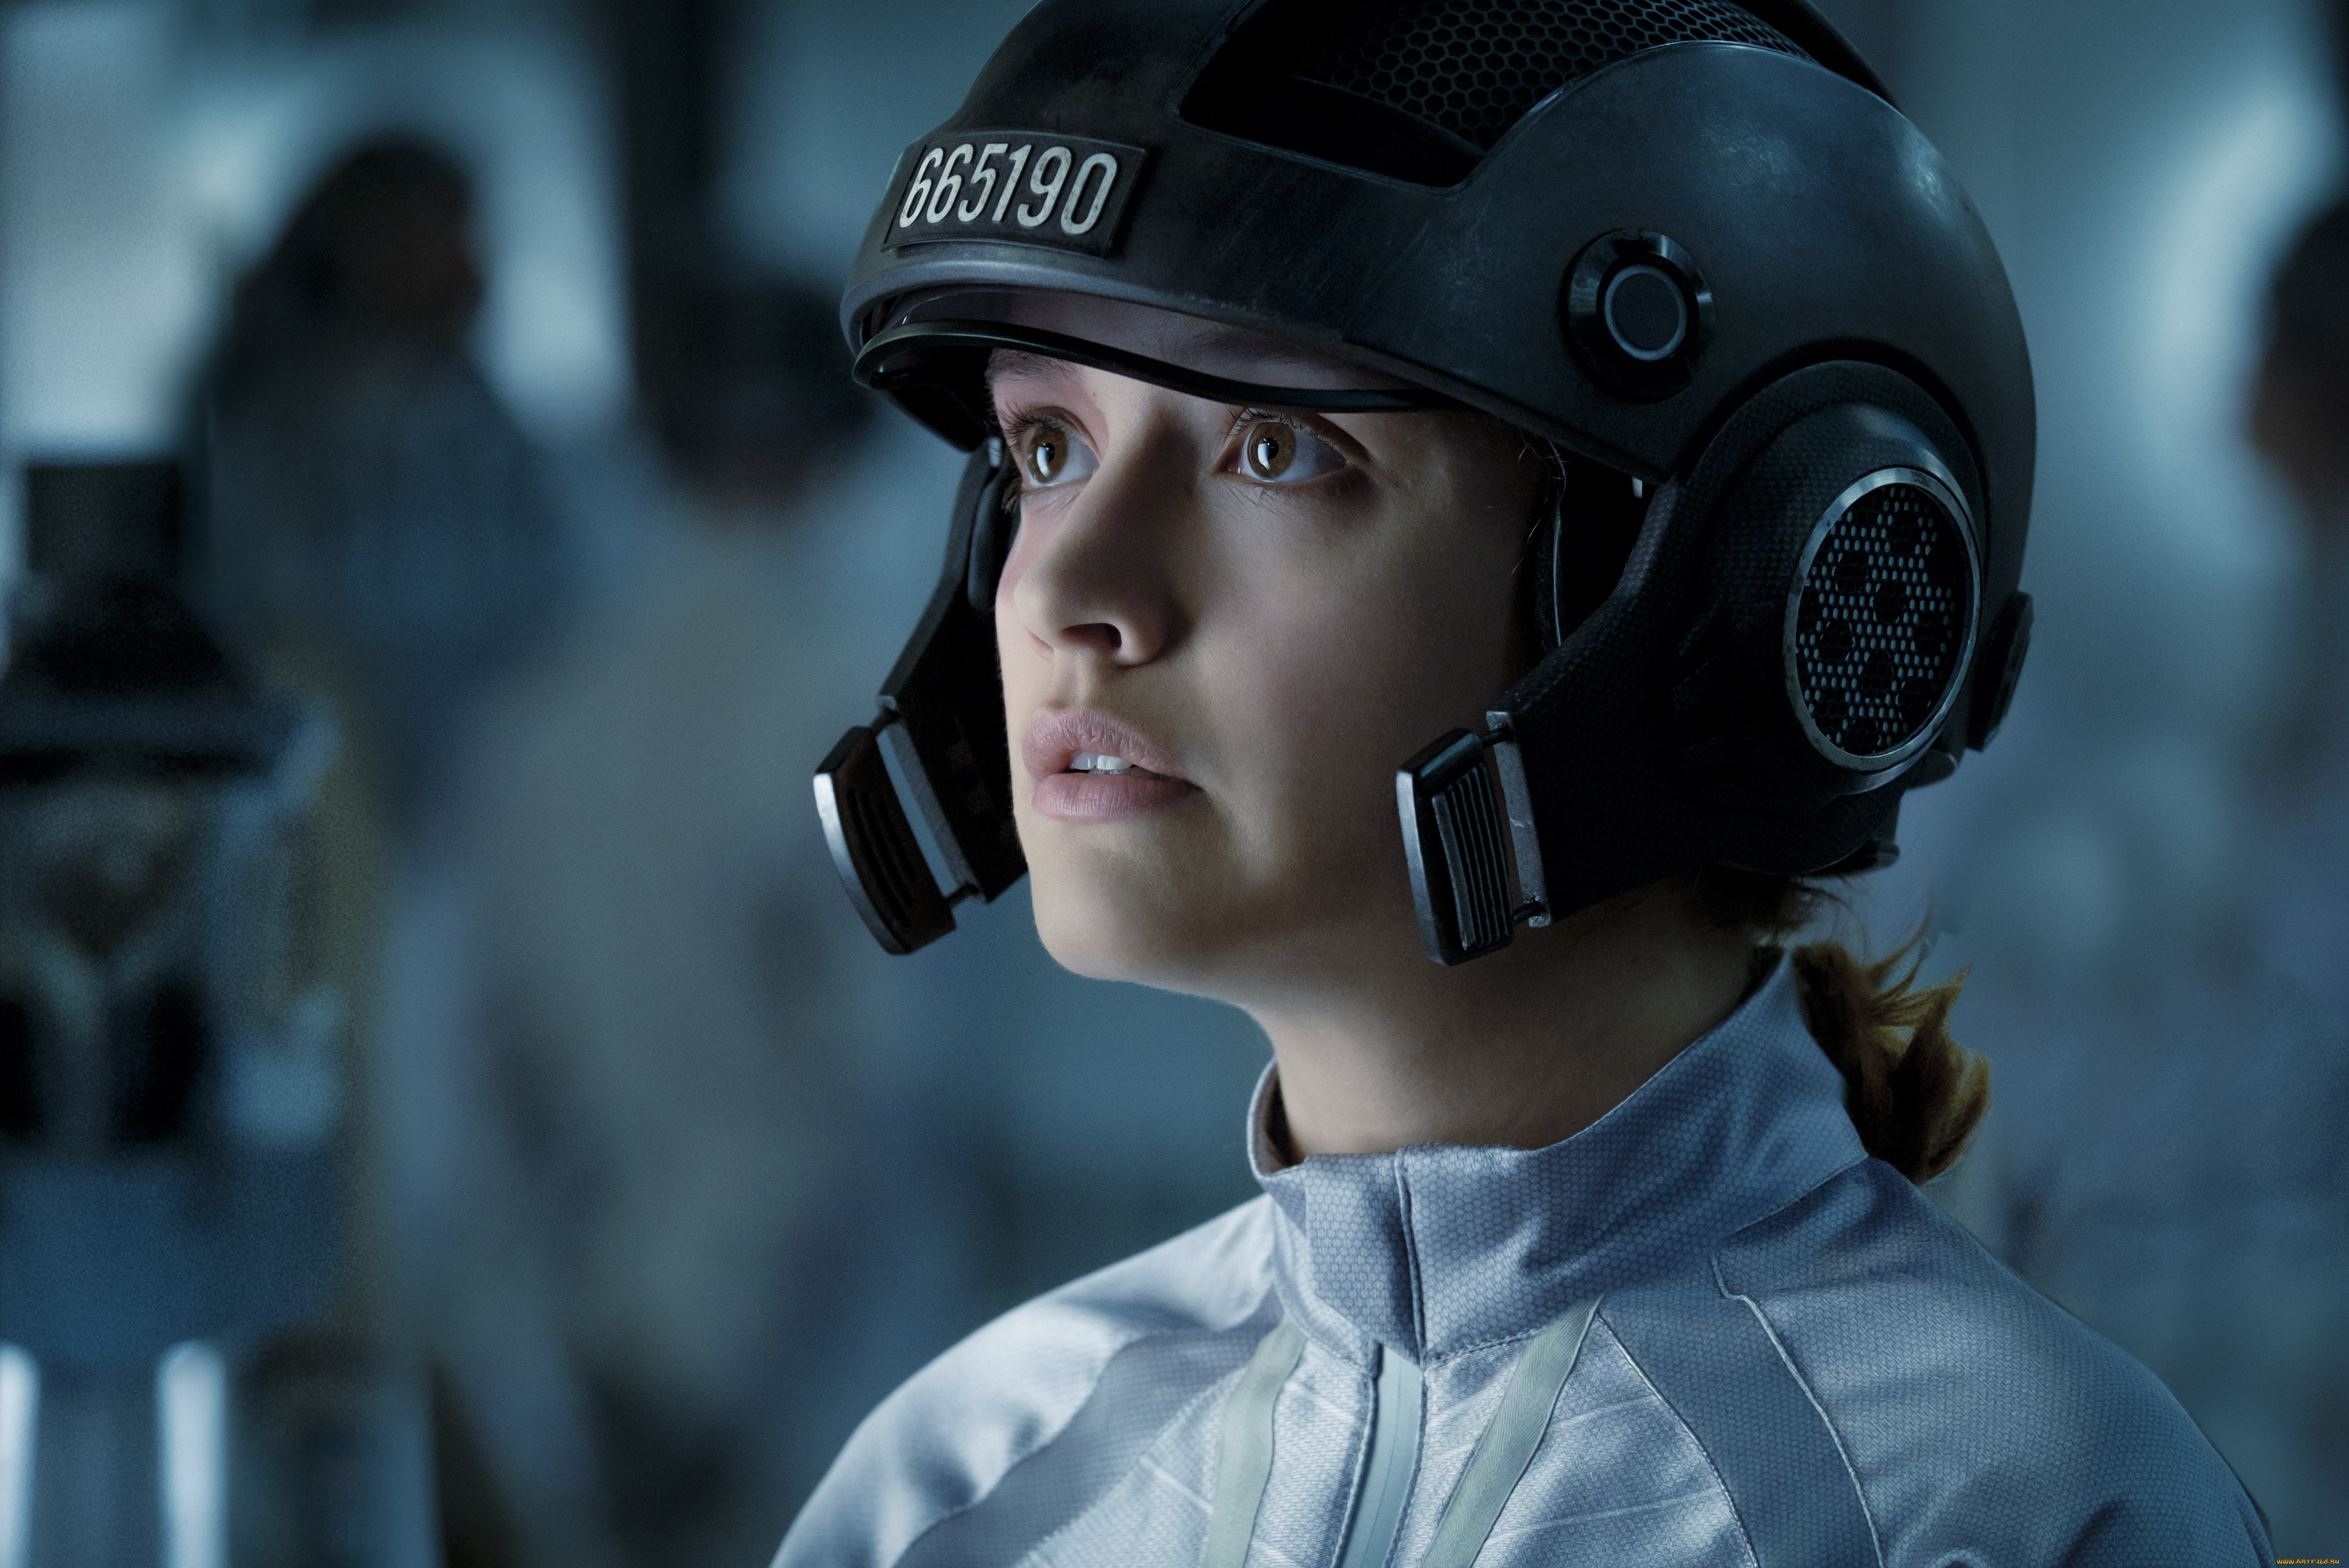    , 2018,  , ready player one, , , , samantha, , , c, c, ready, player, one, 